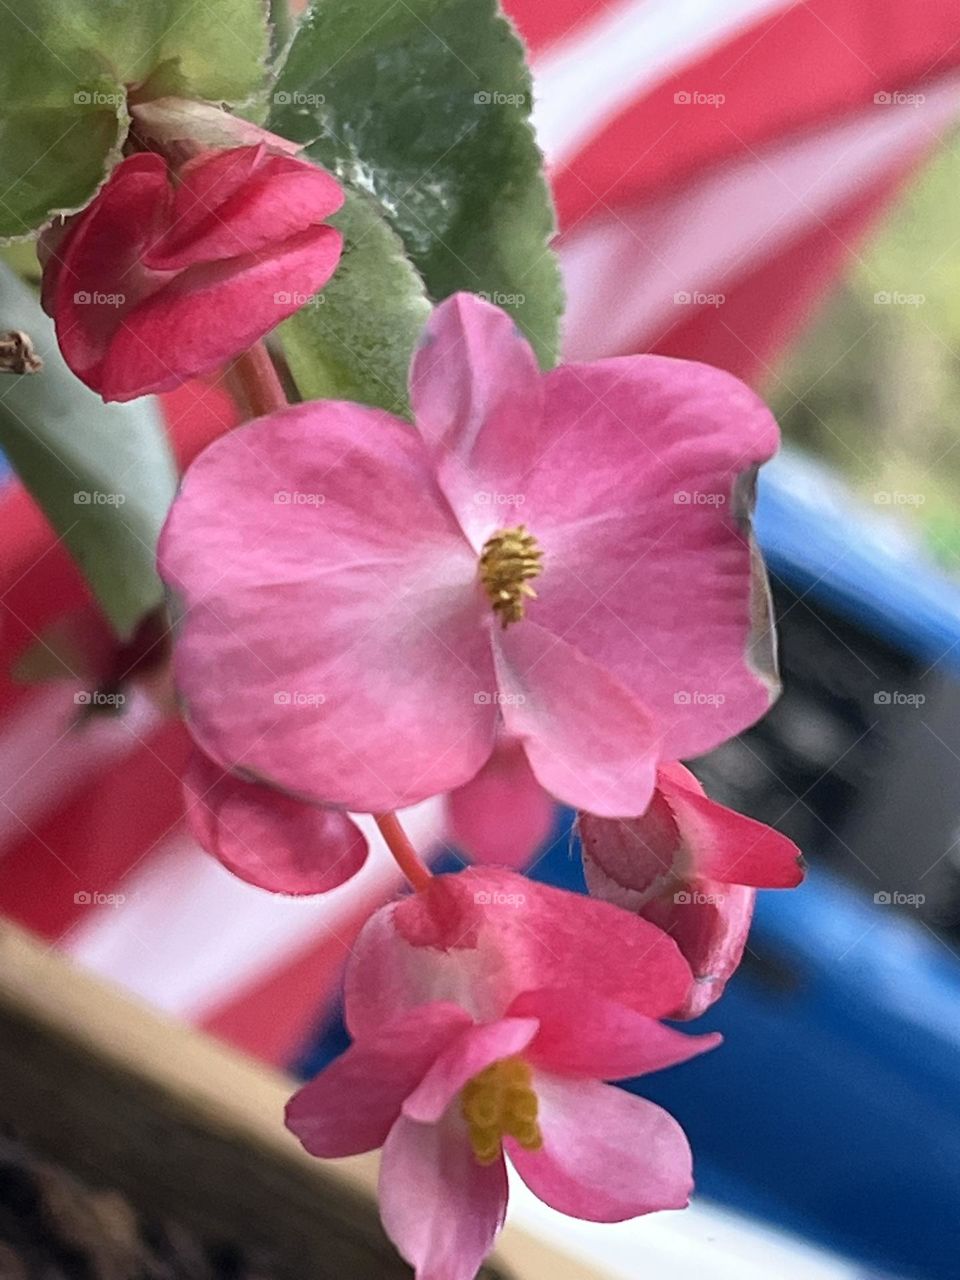 Pretty Flower  learning f stop on iPhone 